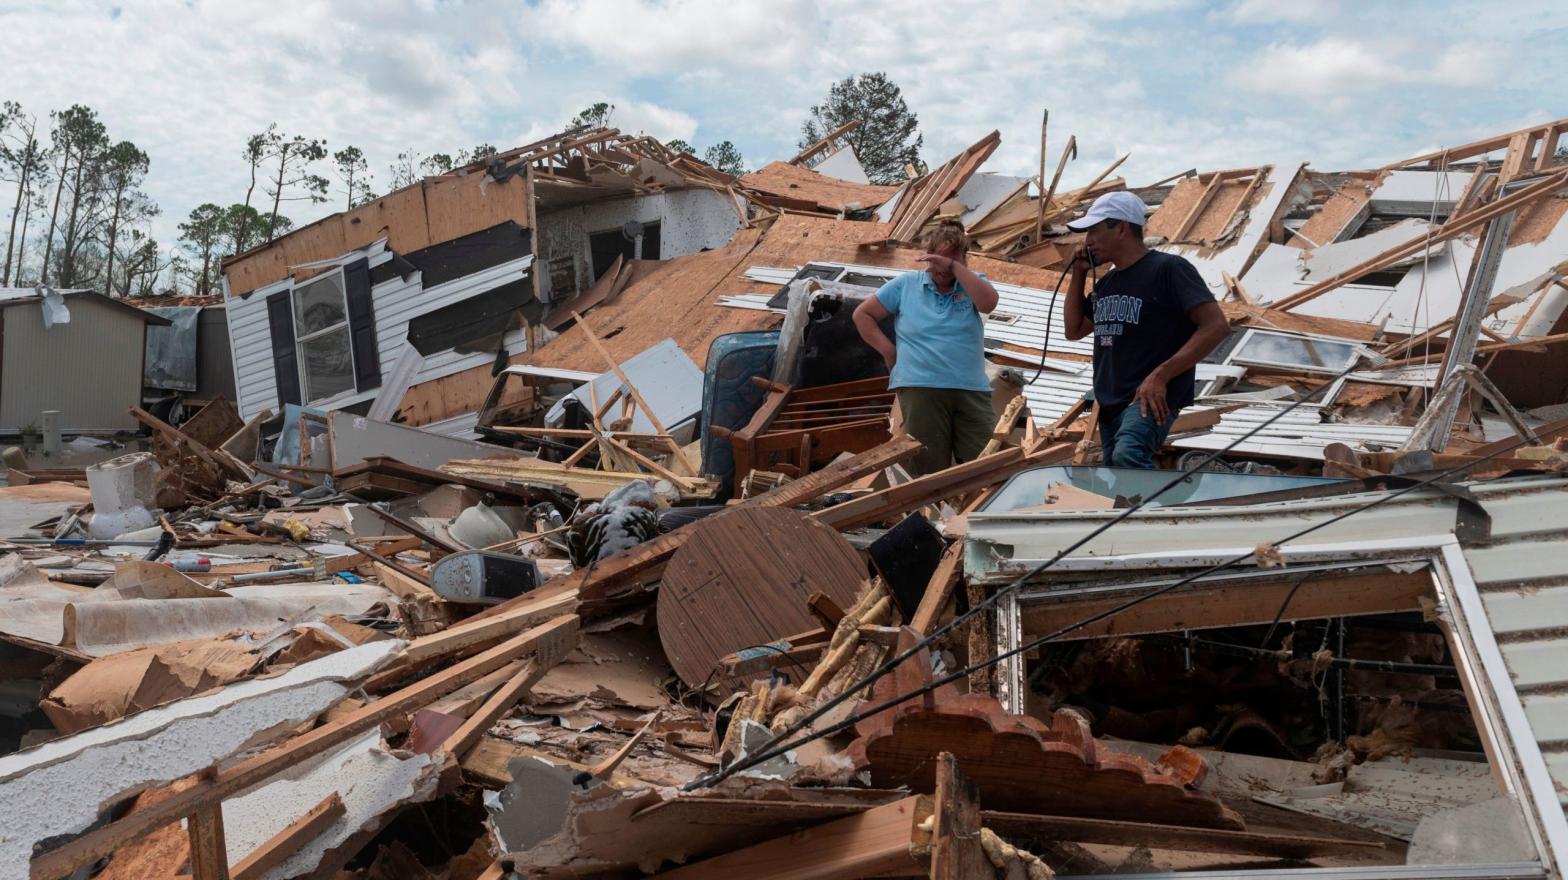 A couple react as they go through their destroyed mobile home following the passing of hurricane Laura in Lake Charles, Louisiana, on August 27, 2020. The same area is set to be hit by Hurricane Delta on Friday. (Photo: Andrew Caballero-Reynolds, Getty Images)